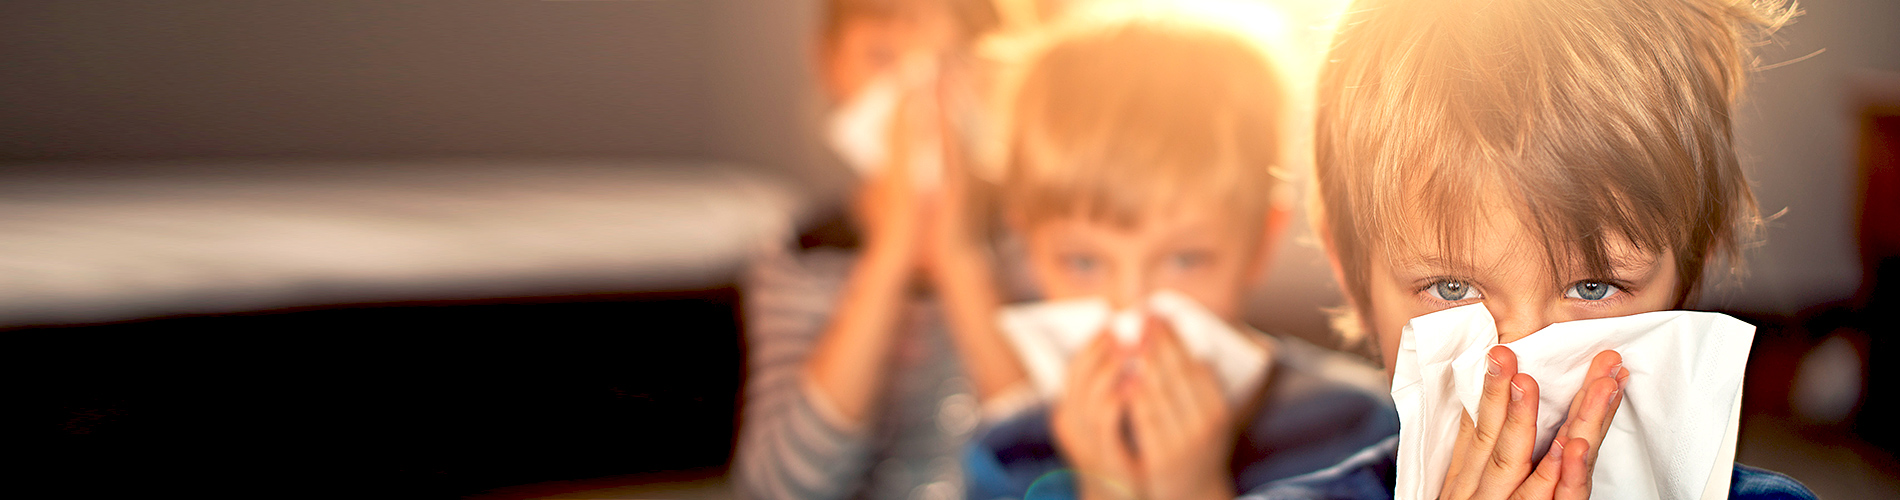 How You Can Safeguard Your Family During Flu Season